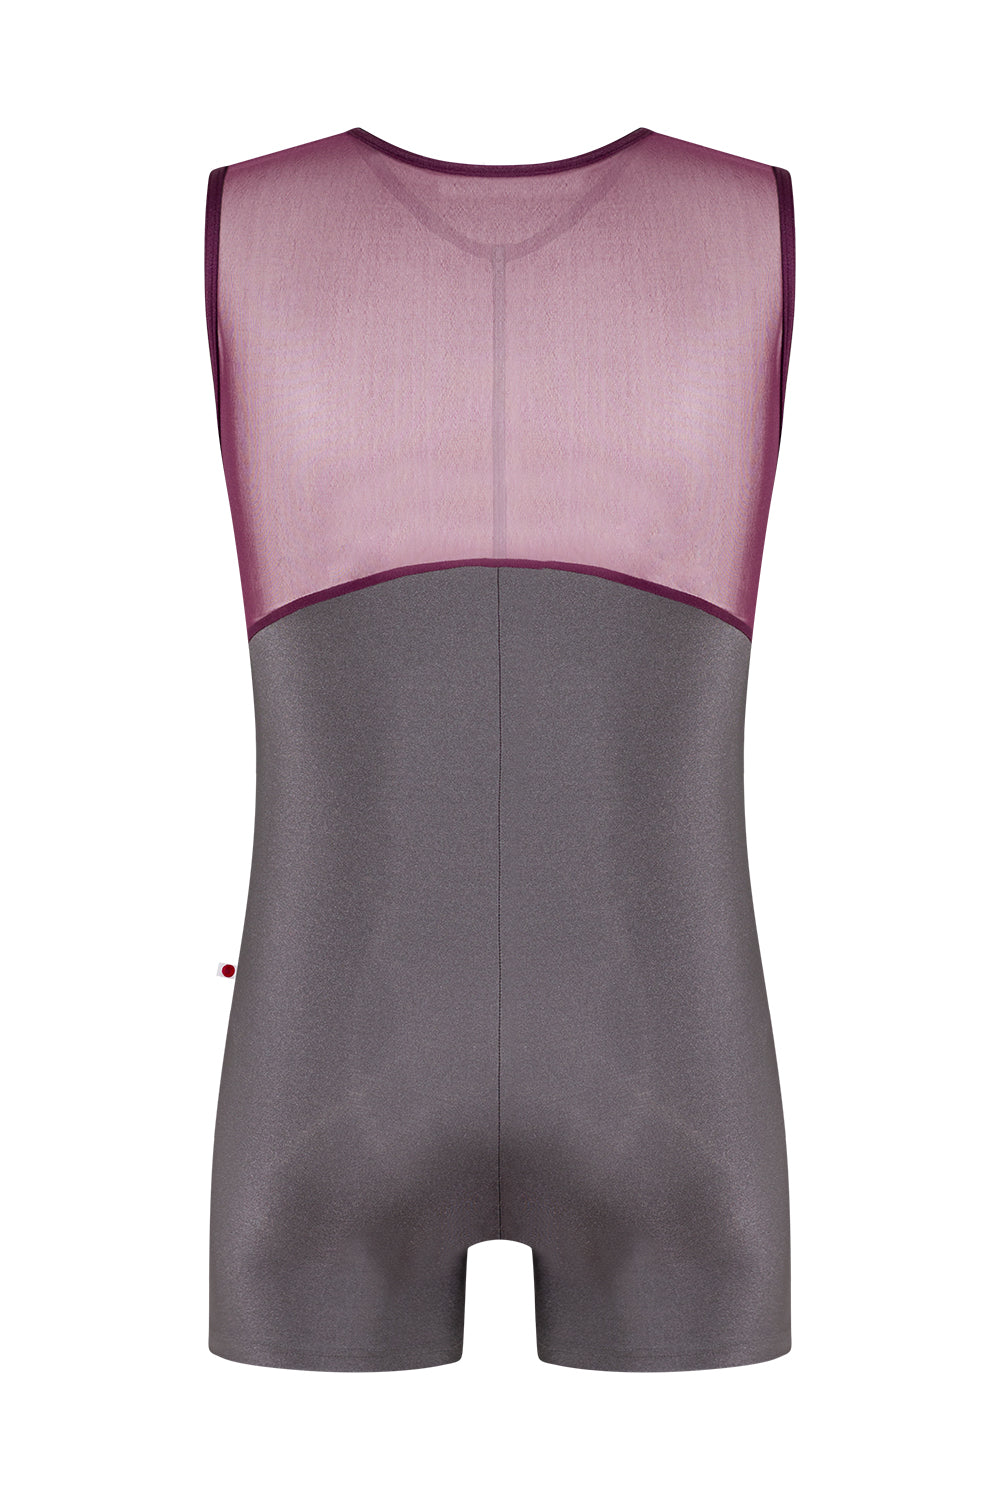 Ken semi-unitard in N-Shadow body color with N-Opera top color and Mesh Opera back